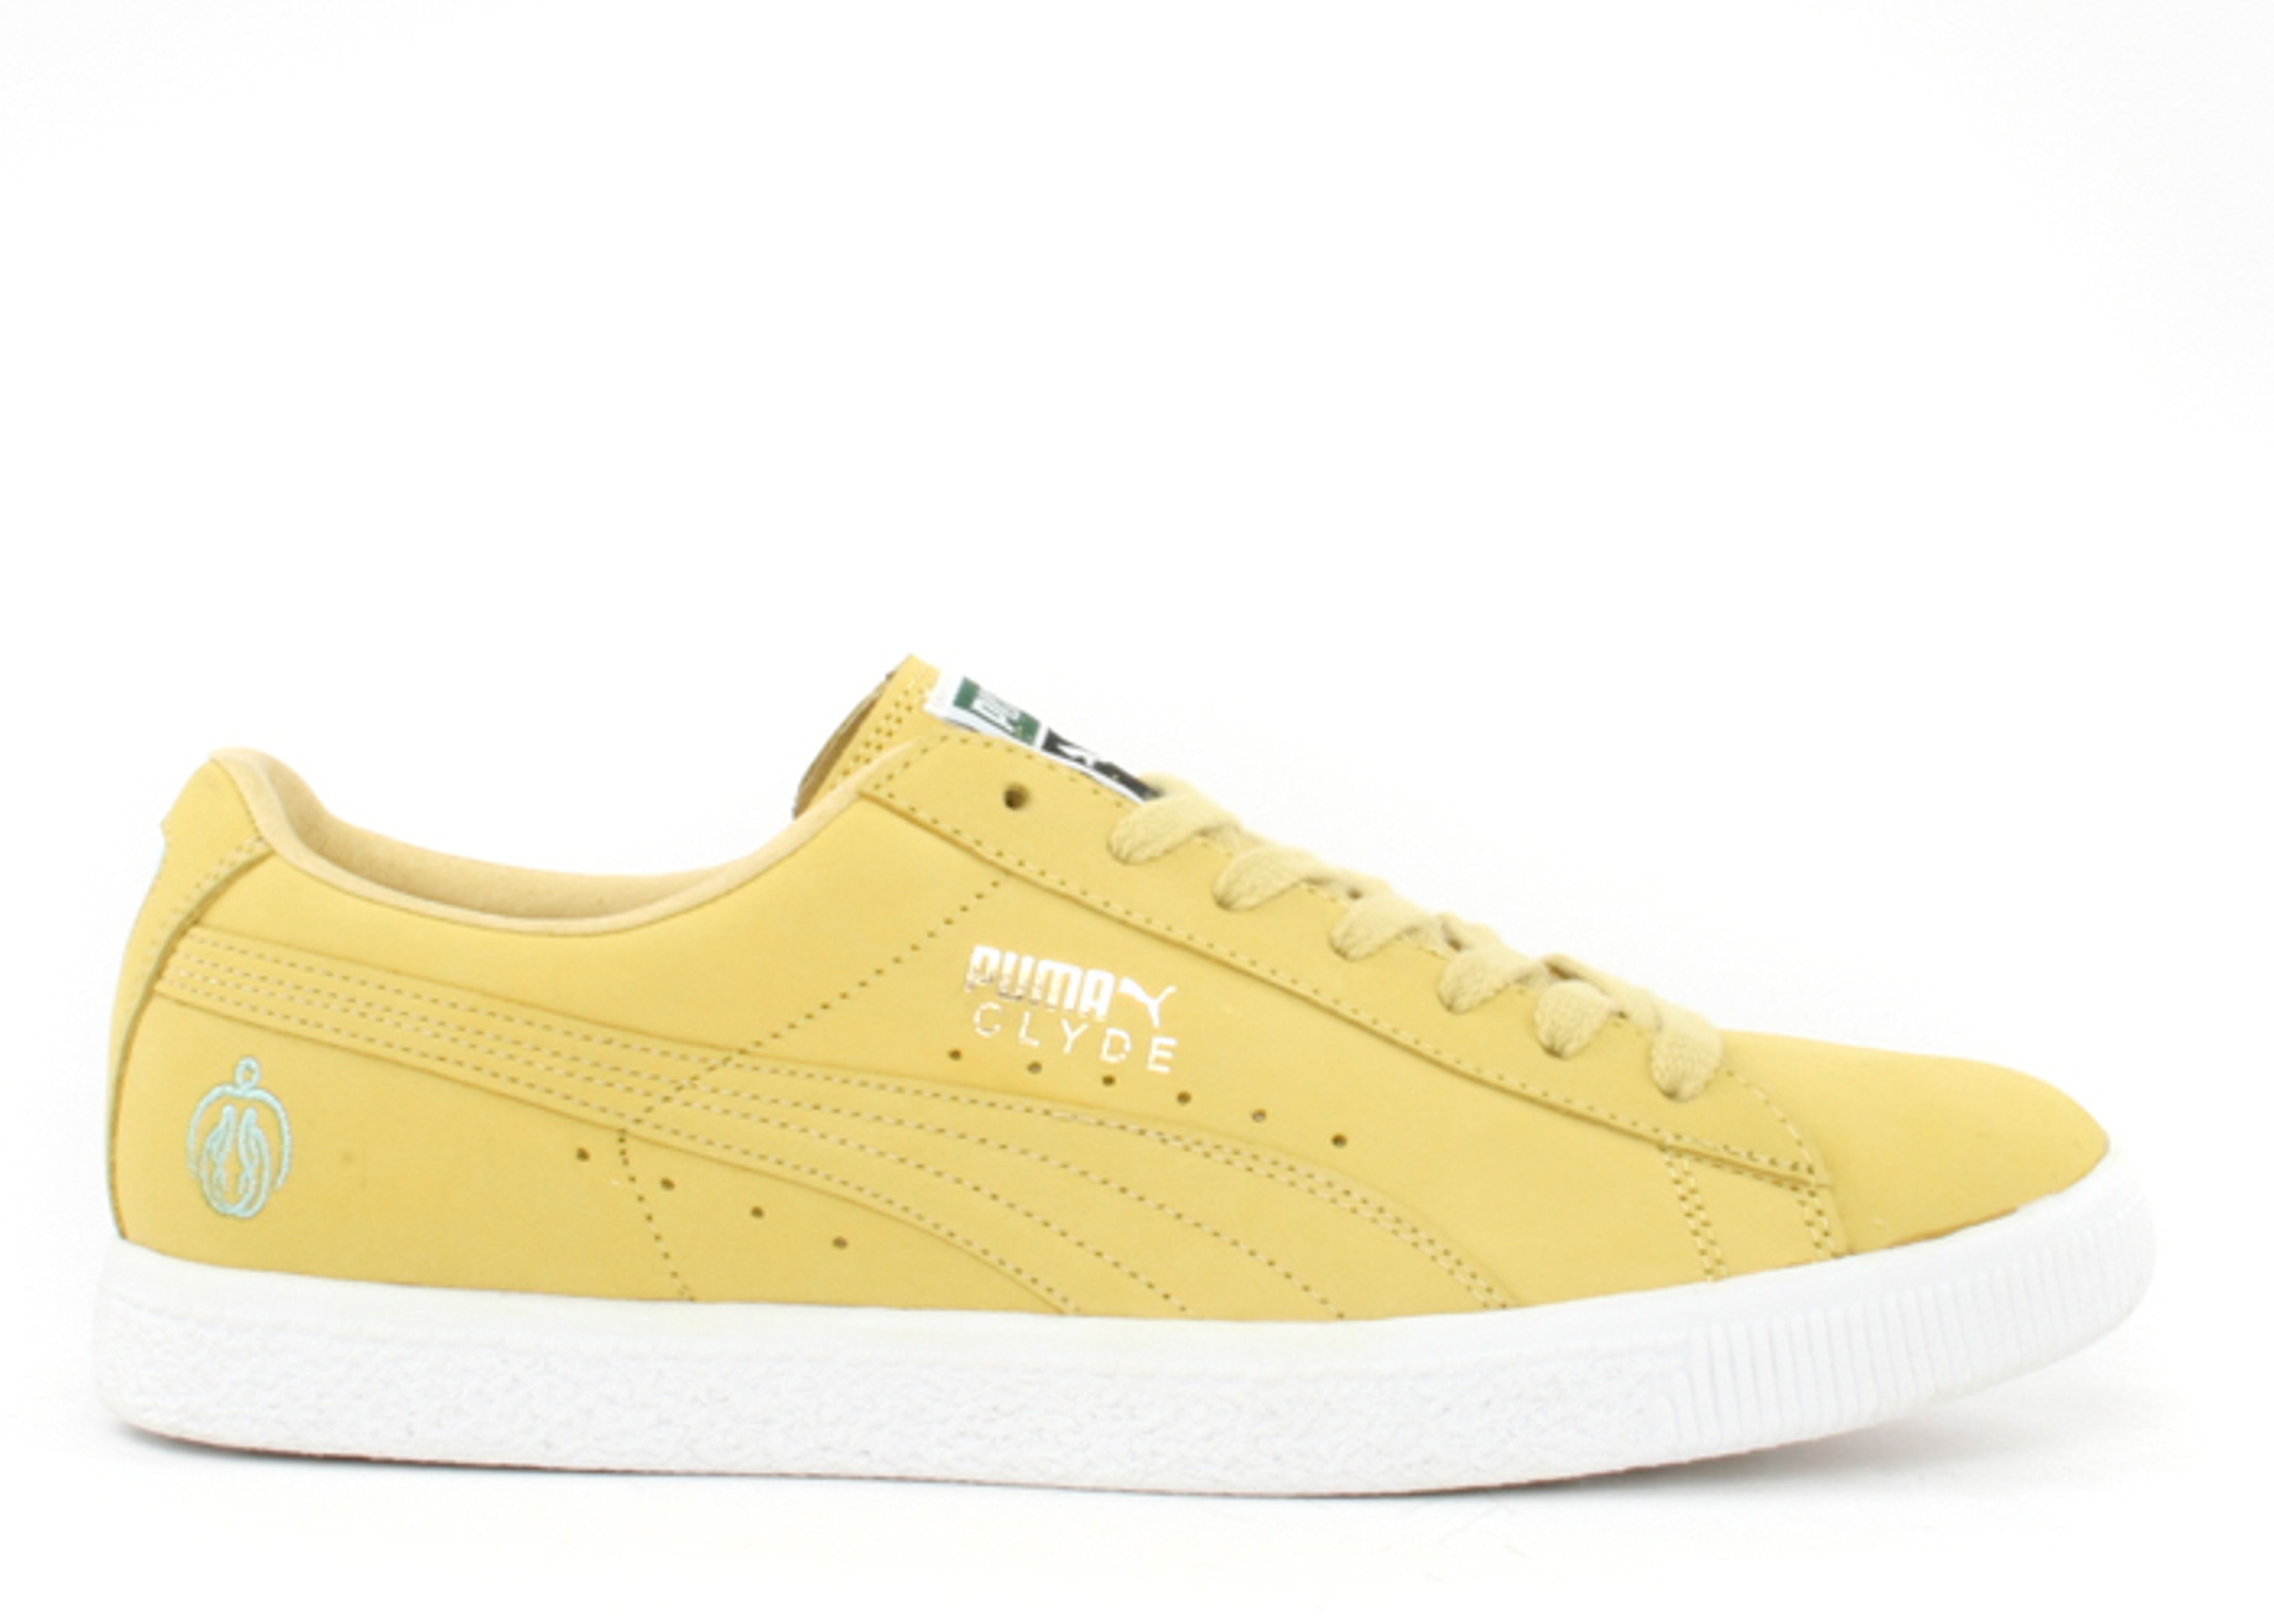 The Clyde Easter - Puma - 18210402 